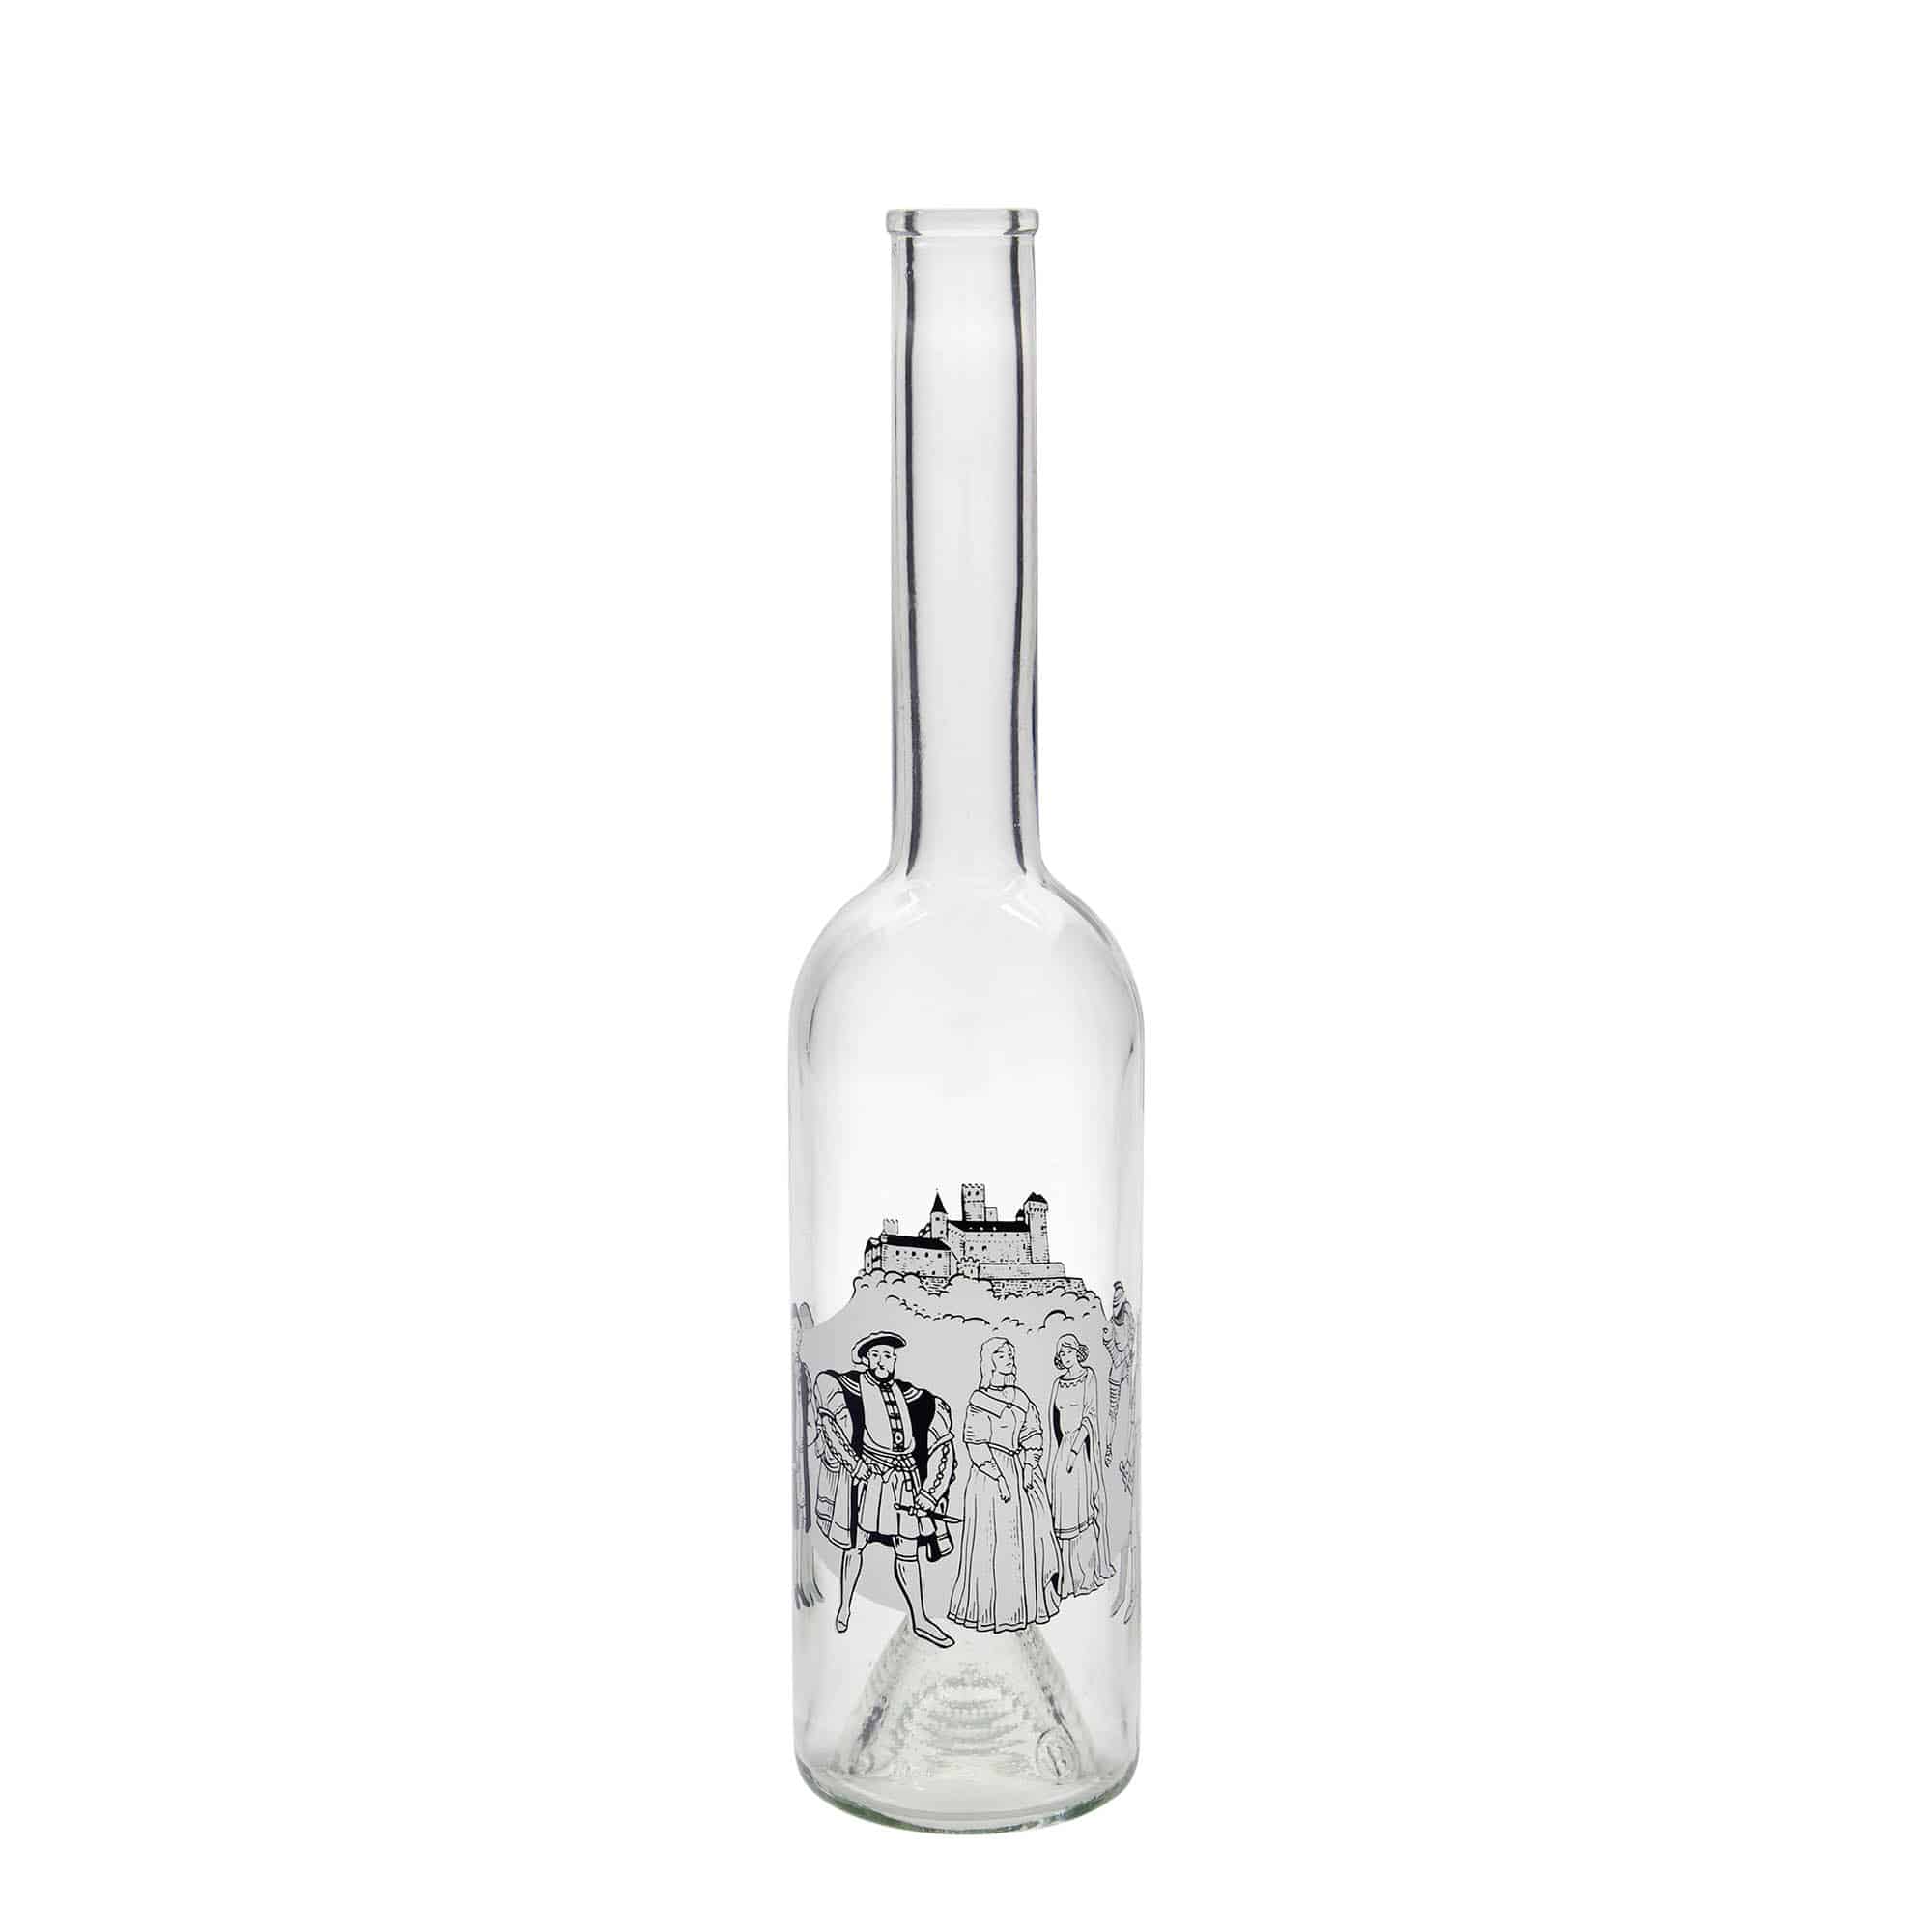 500 ml glass bottle 'Opera', print: Middle Ages, closure: cork